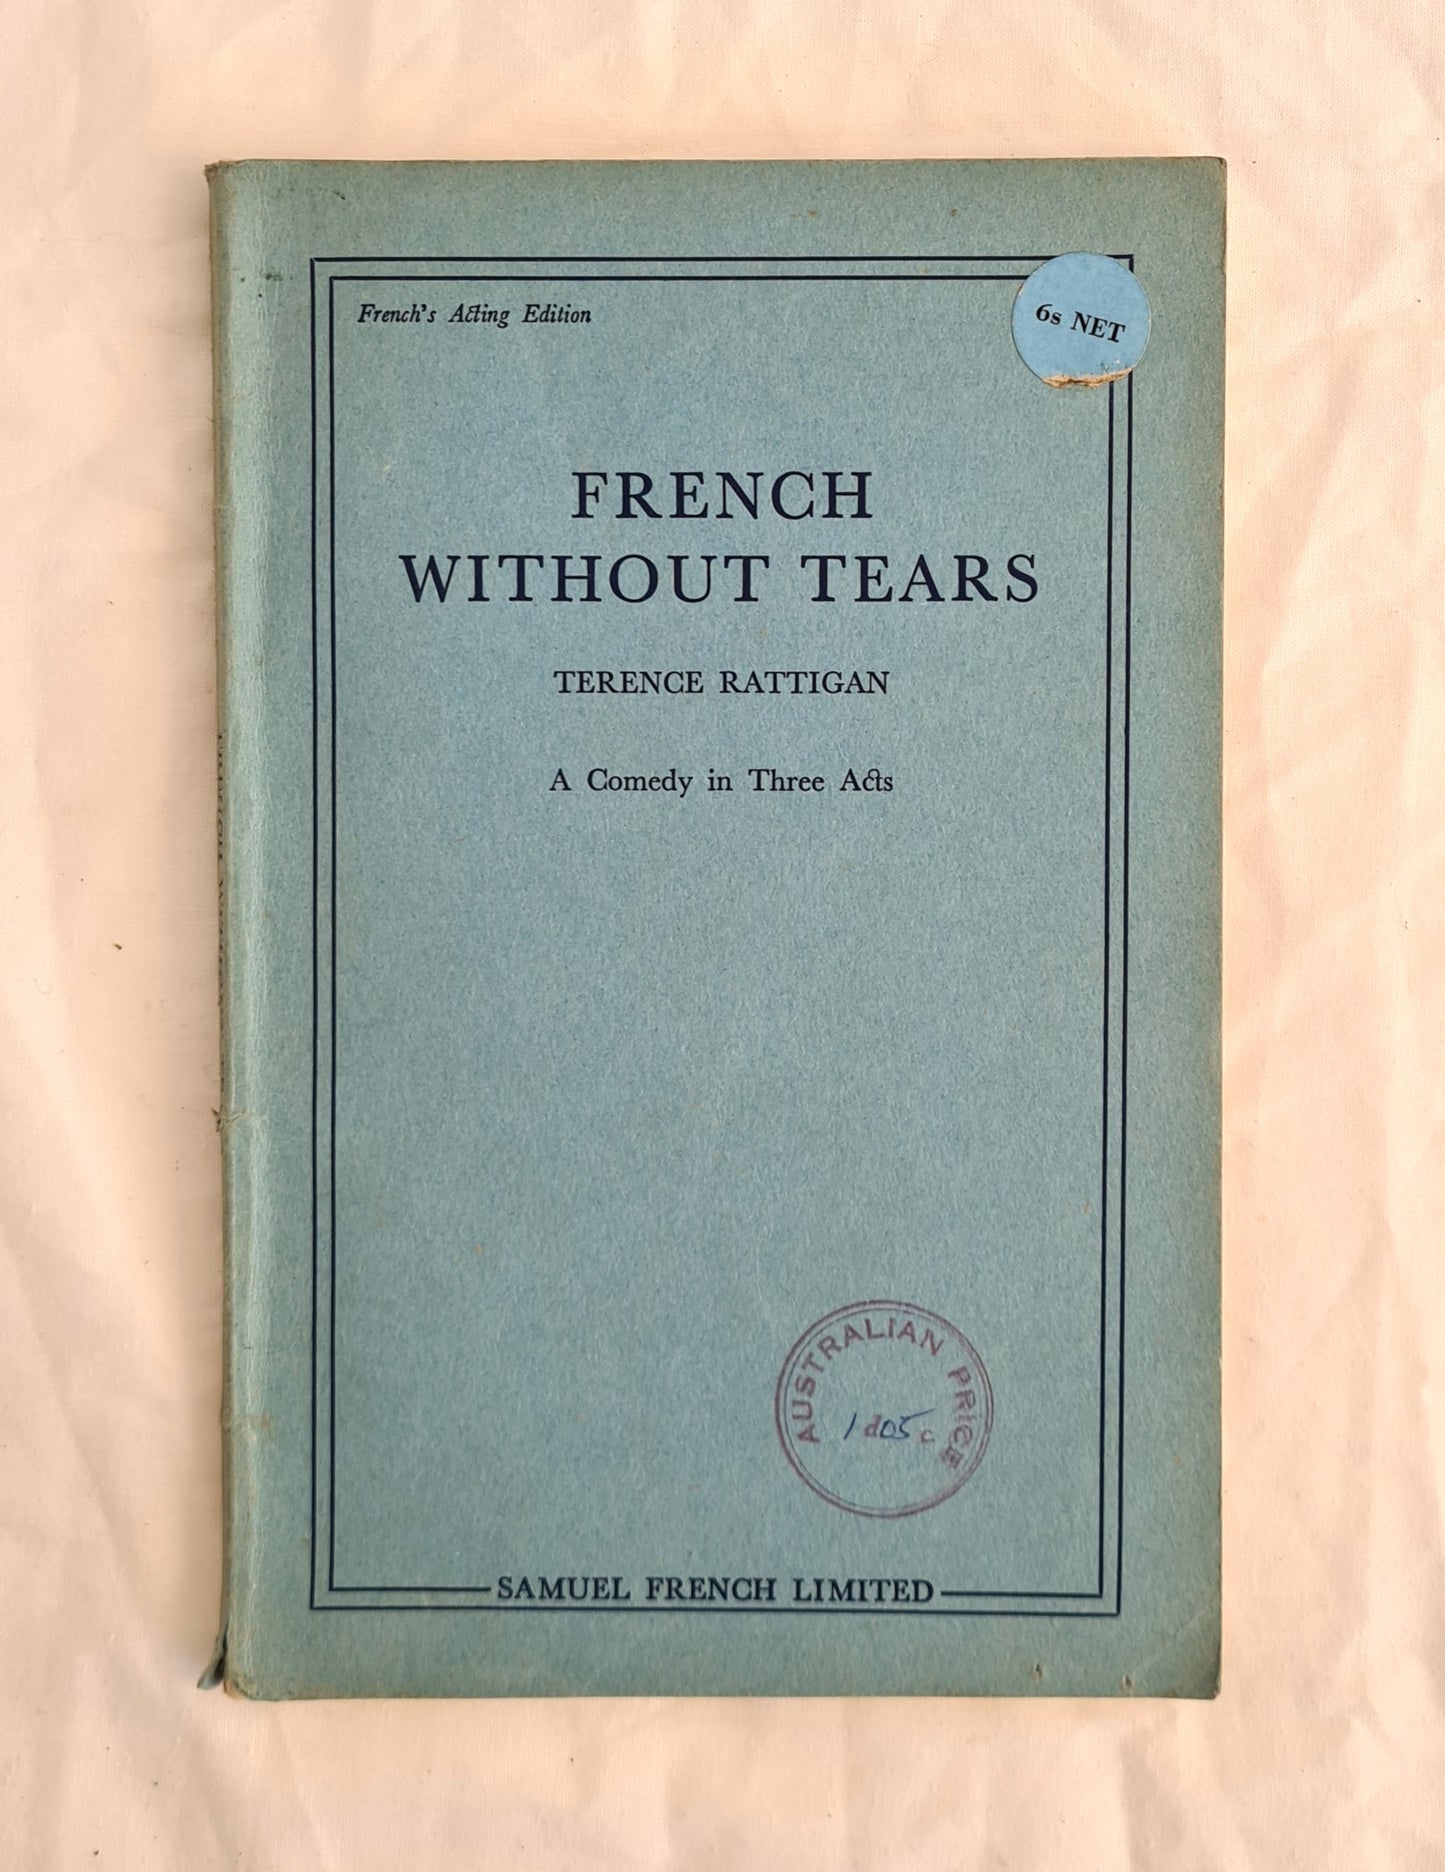 French Without Tears  A Comedy in Three Acts  by Terence Rattigan